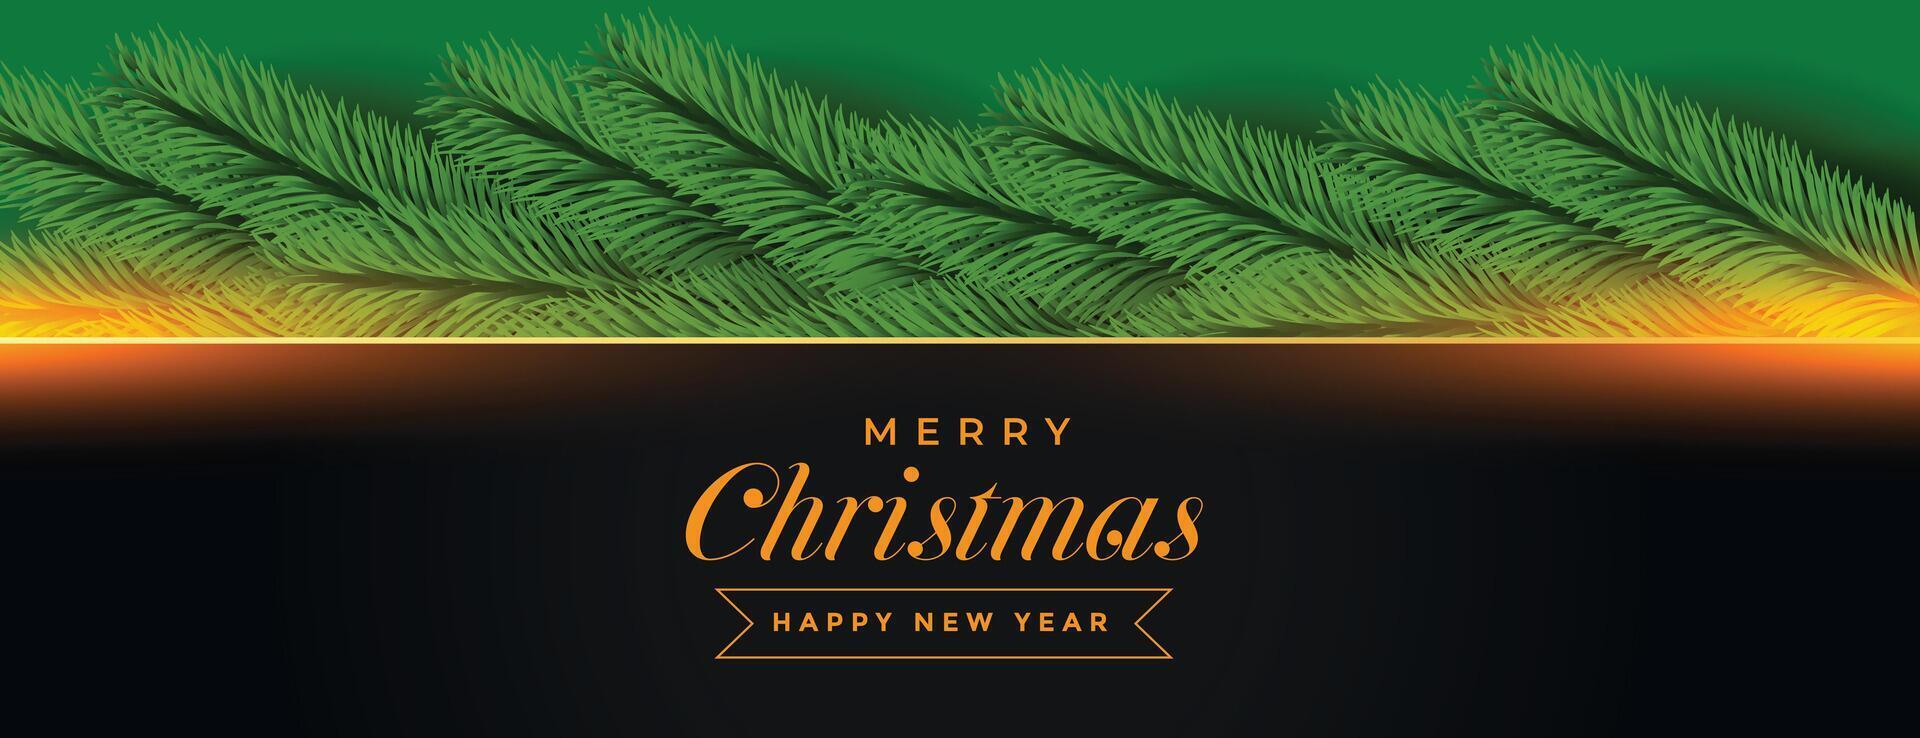 merry christmas banner with pine tree decoration vector